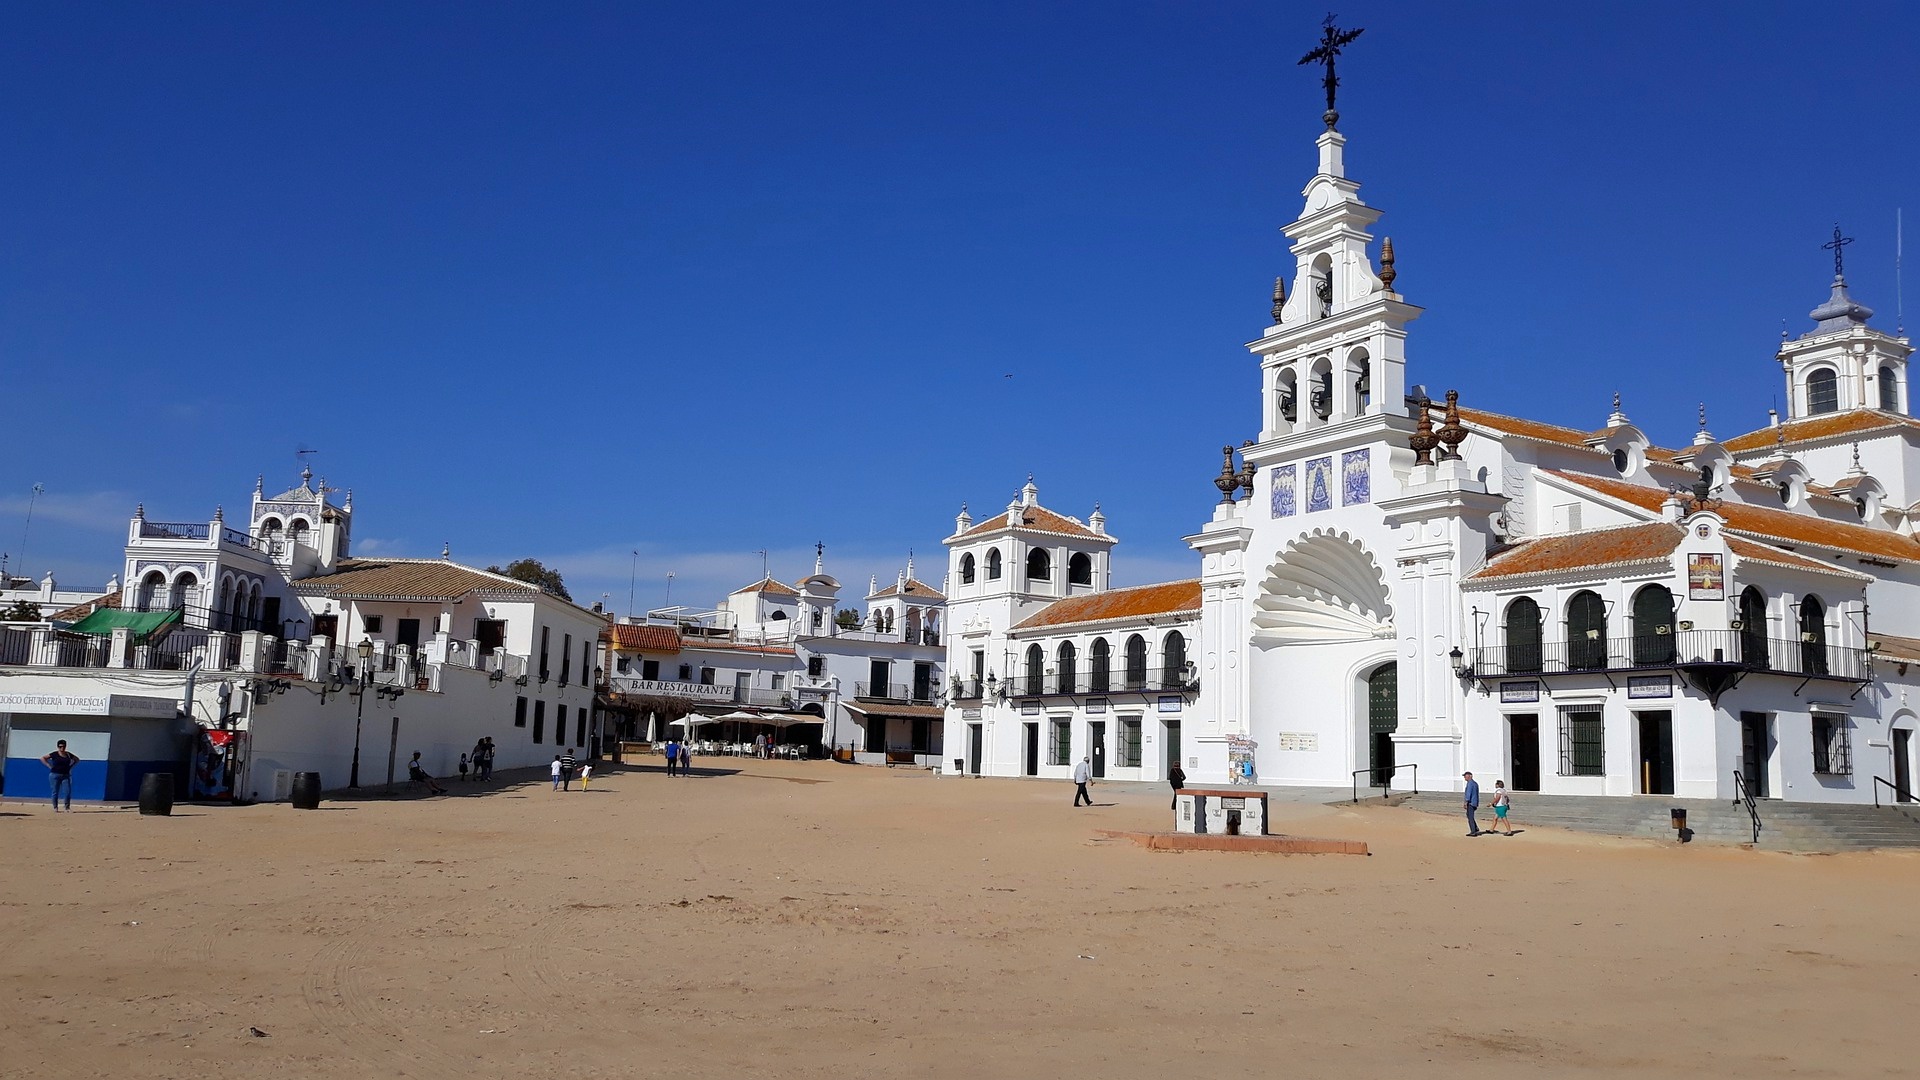 A not quite traditional whitewashed Andalusian village – El Rocio has streets full of sand